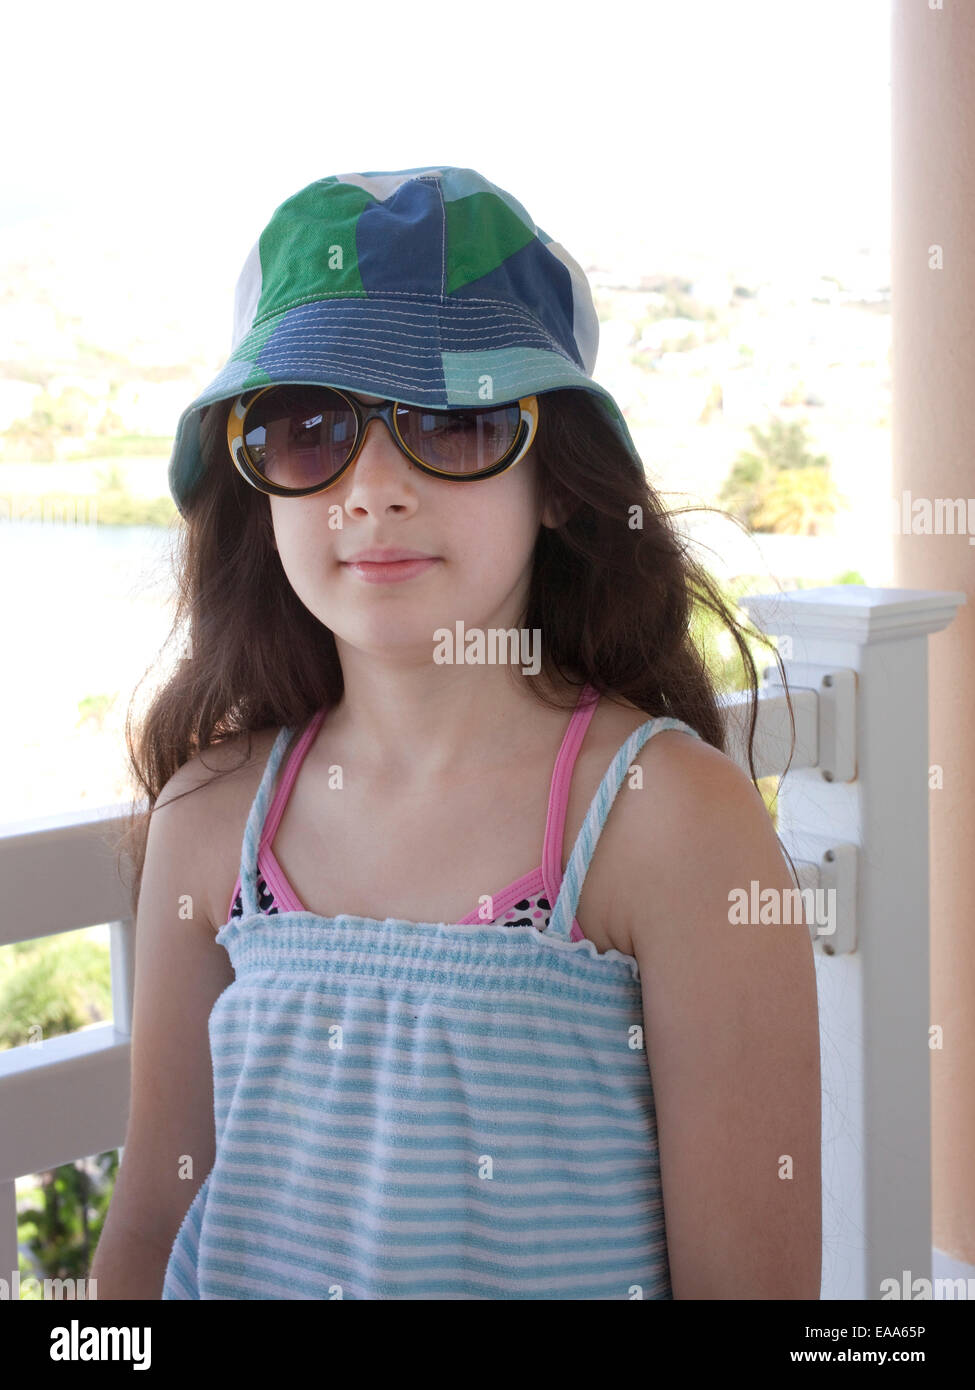 girl on beach vacation wearing hat and sunglasses Stock Photo